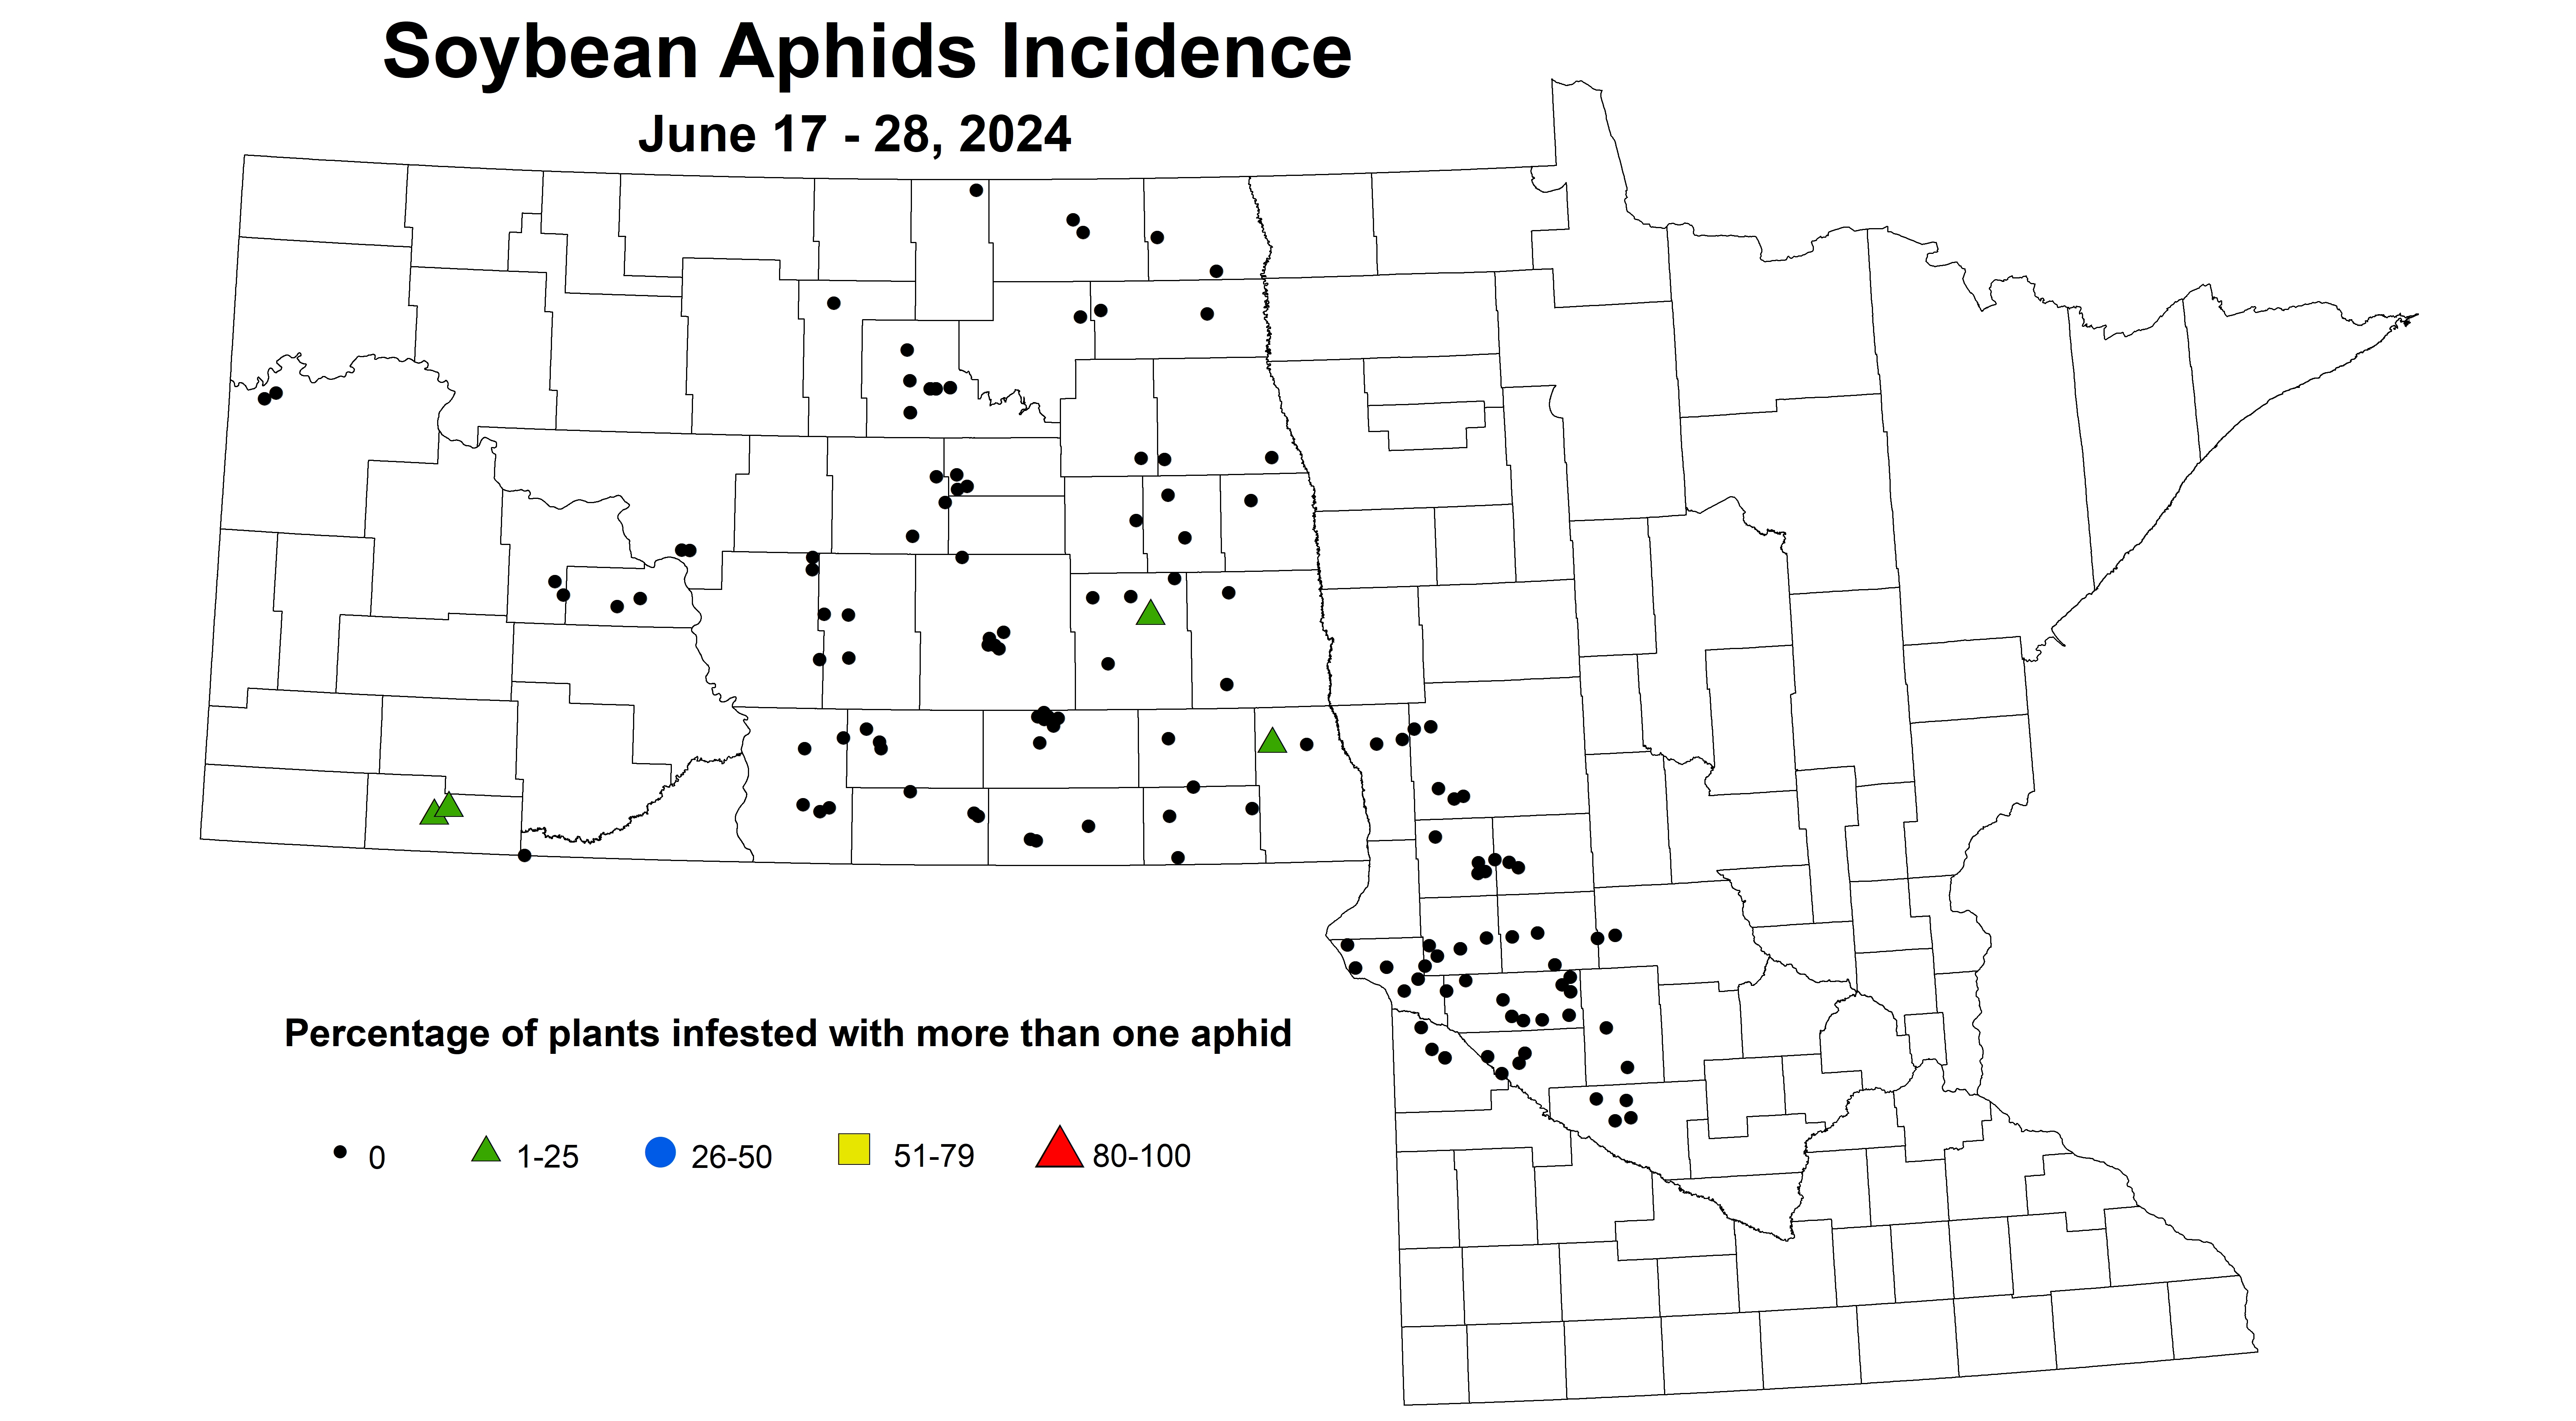 soybean aphid incidence June 17-28 2024